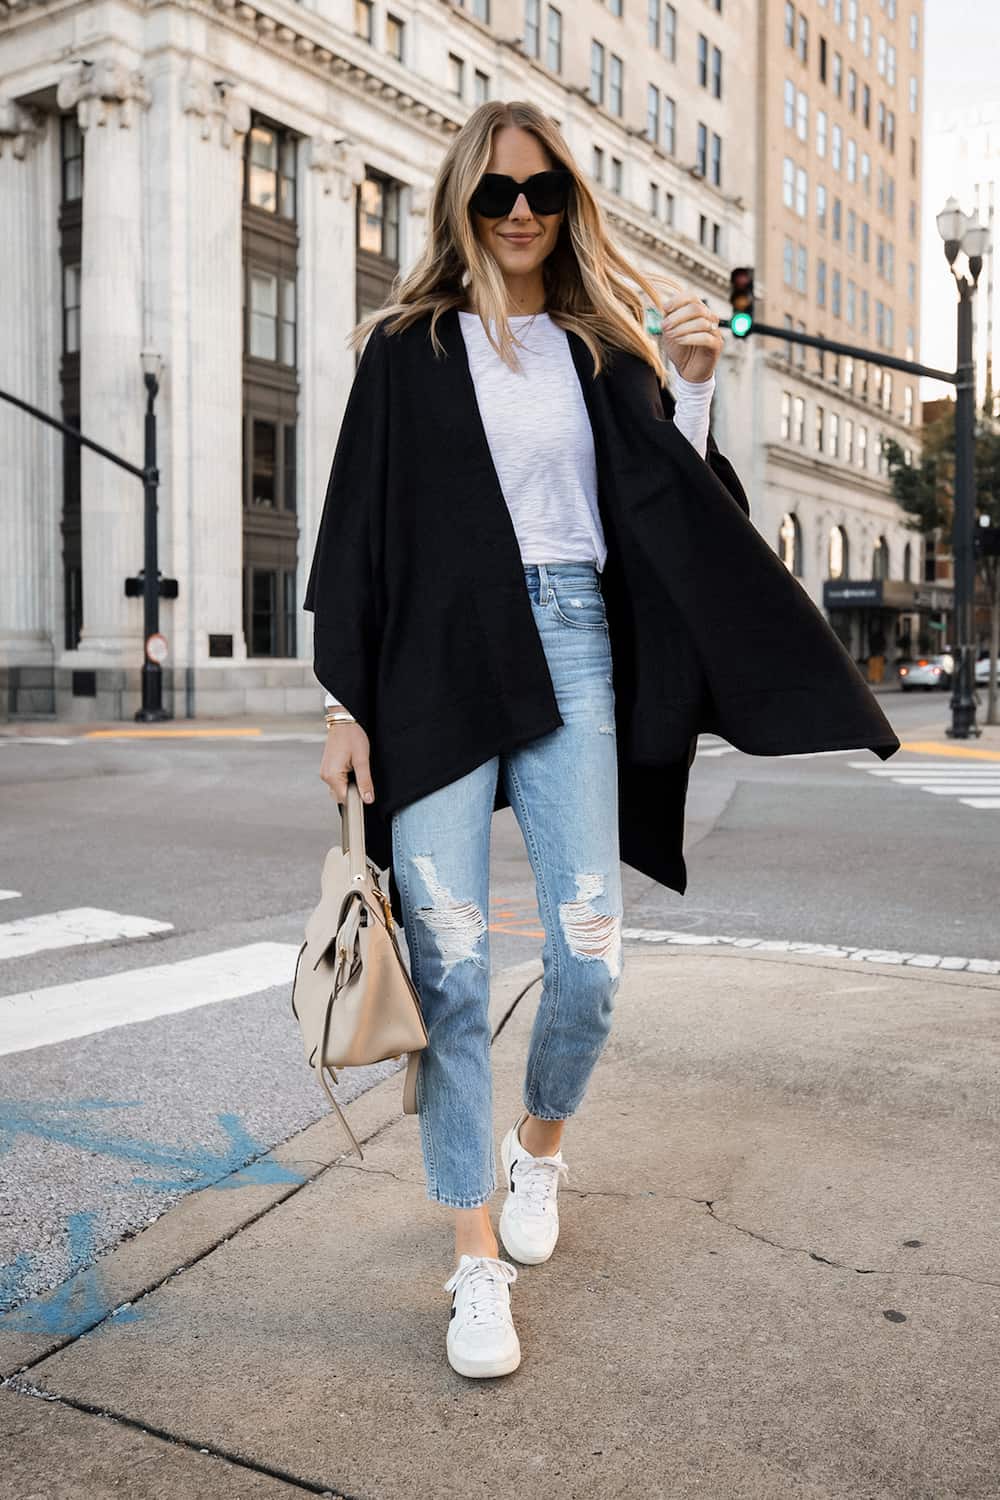 image of a woman wearing an open black poncho, white top, blue jeans, and white sneakers